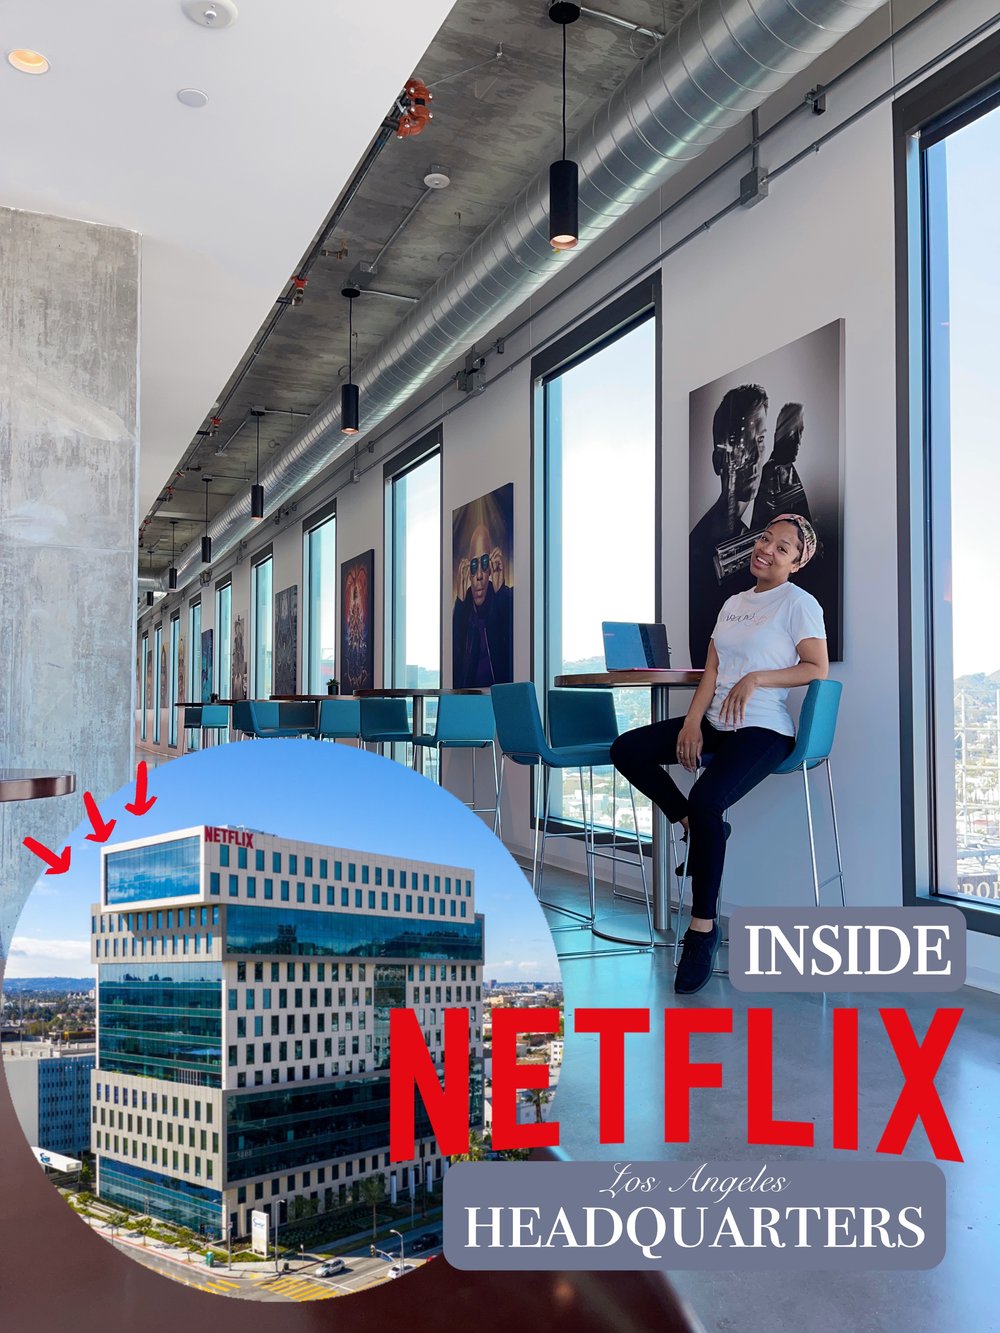 Take An Exclusive Look Inside Netflix HQ in Hollywood! I Go Behind the  Scenes of Billion-Dollar Corp — A Personal Blog by Te'Keya Krystal